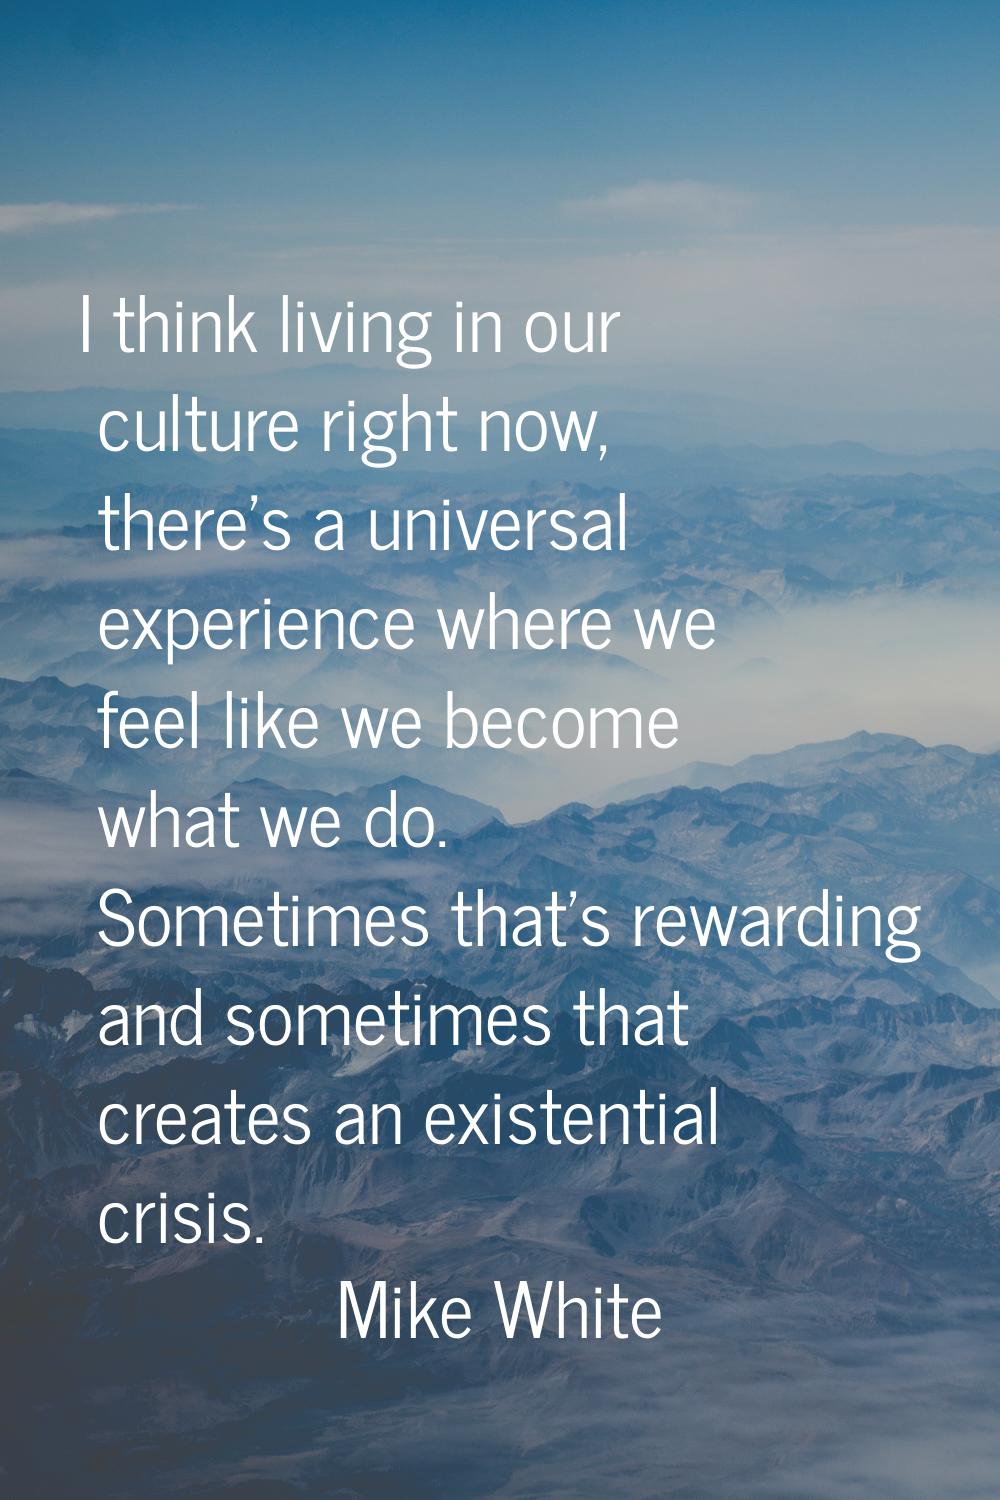 I think living in our culture right now, there's a universal experience where we feel like we becom